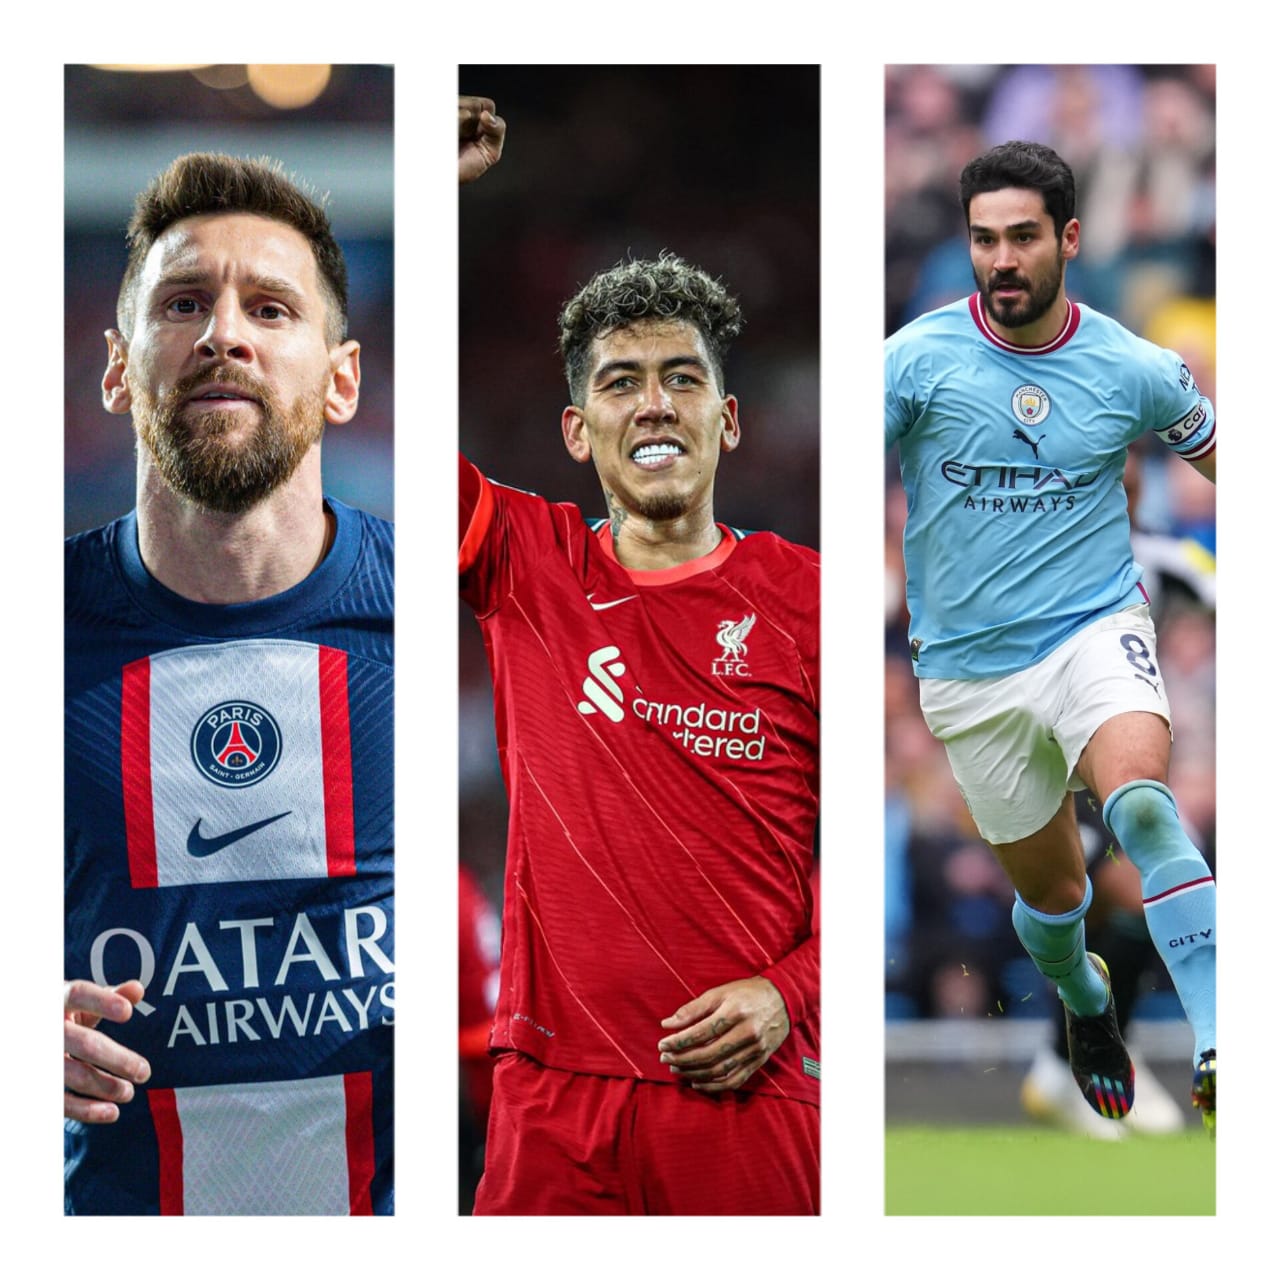 Top three free players the clubs should sign this summer